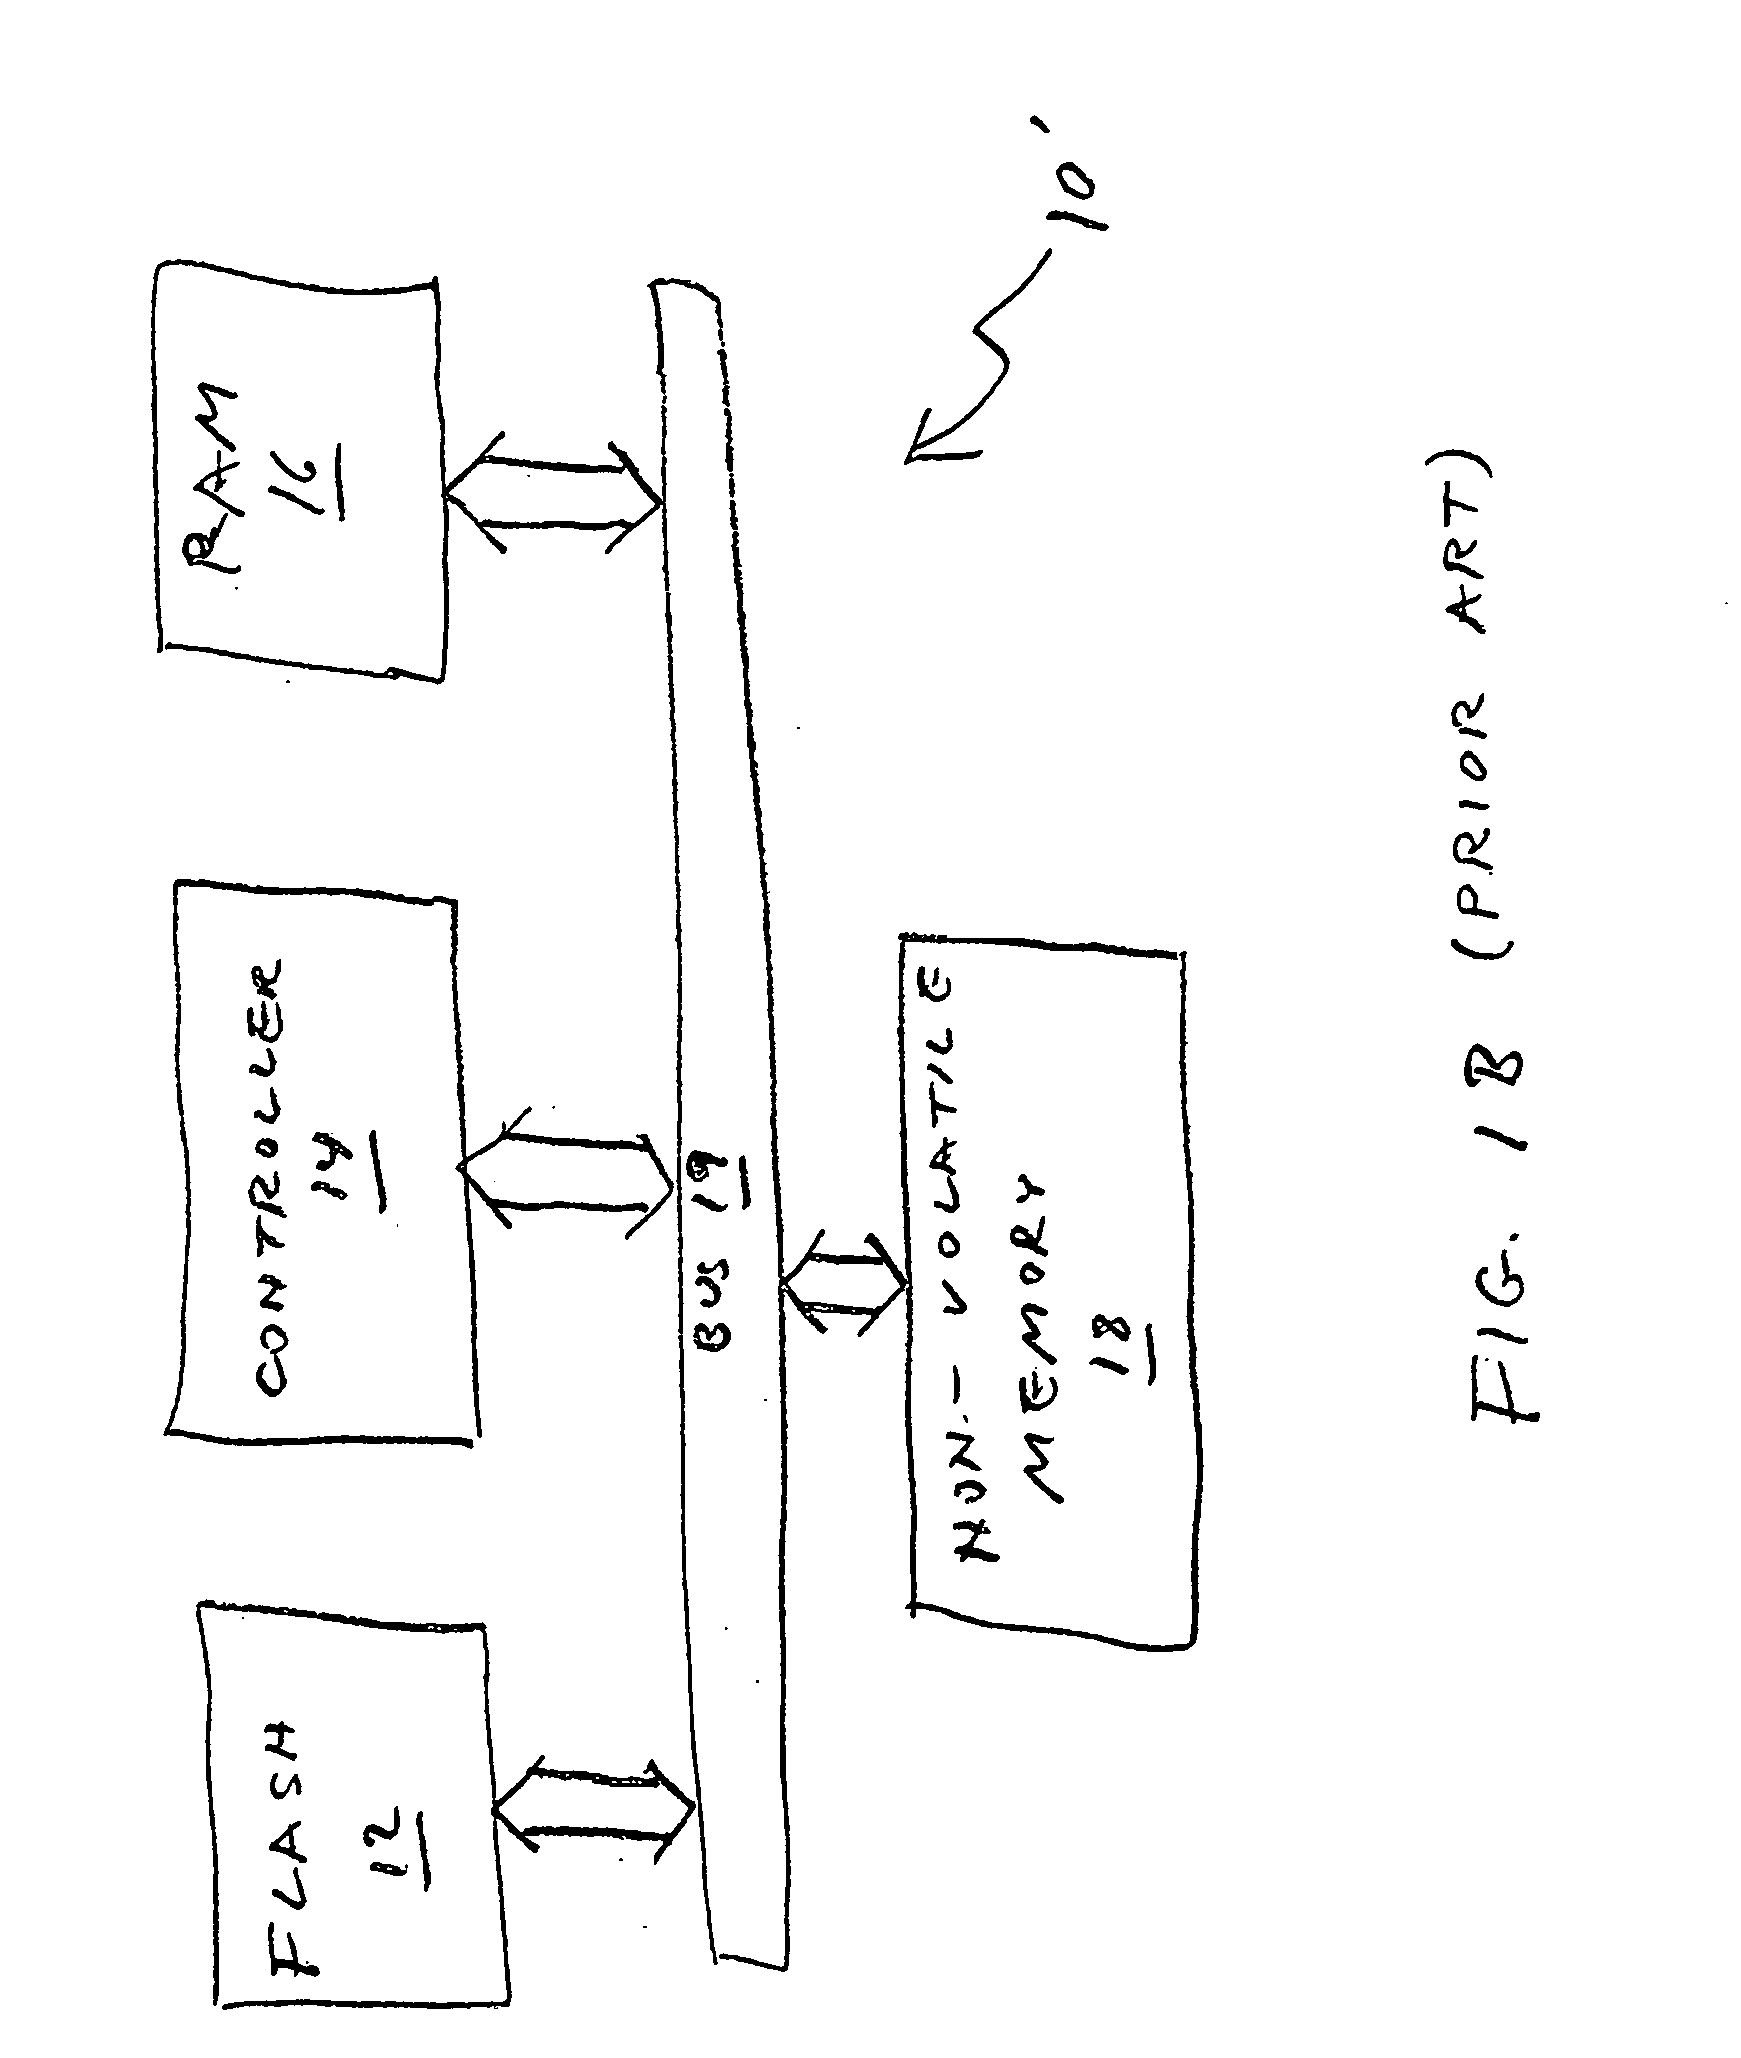 Flash memory management method that is resistant to data corruption by power loss